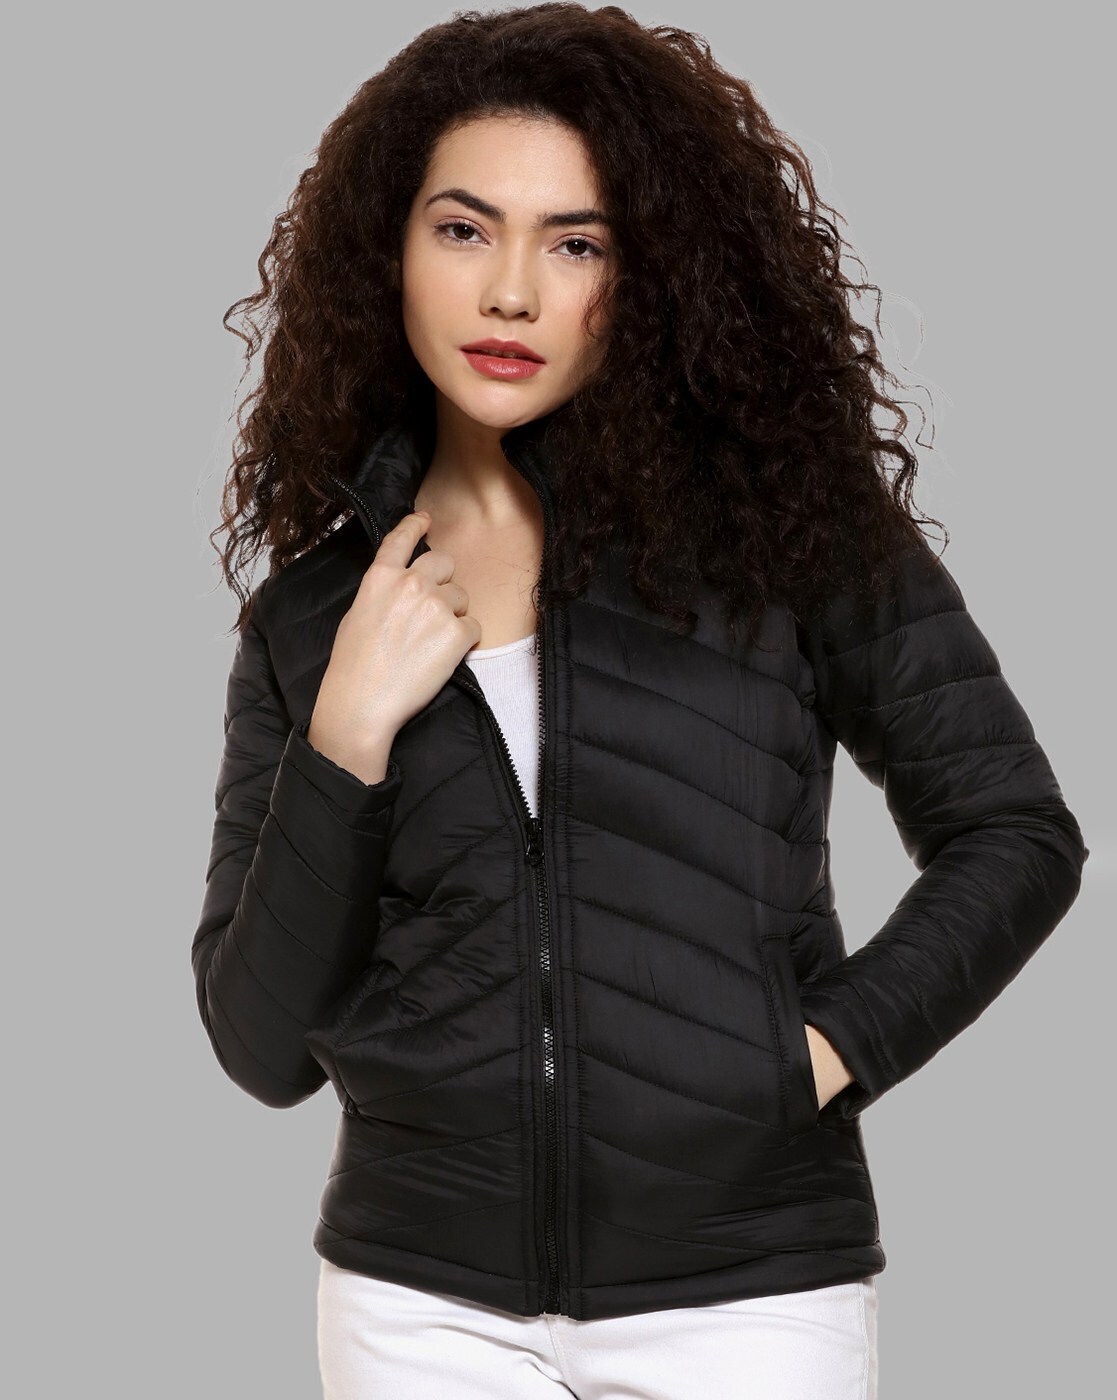 Women Black Leather Jackets - Buy Black Leather Jackets for Women in India